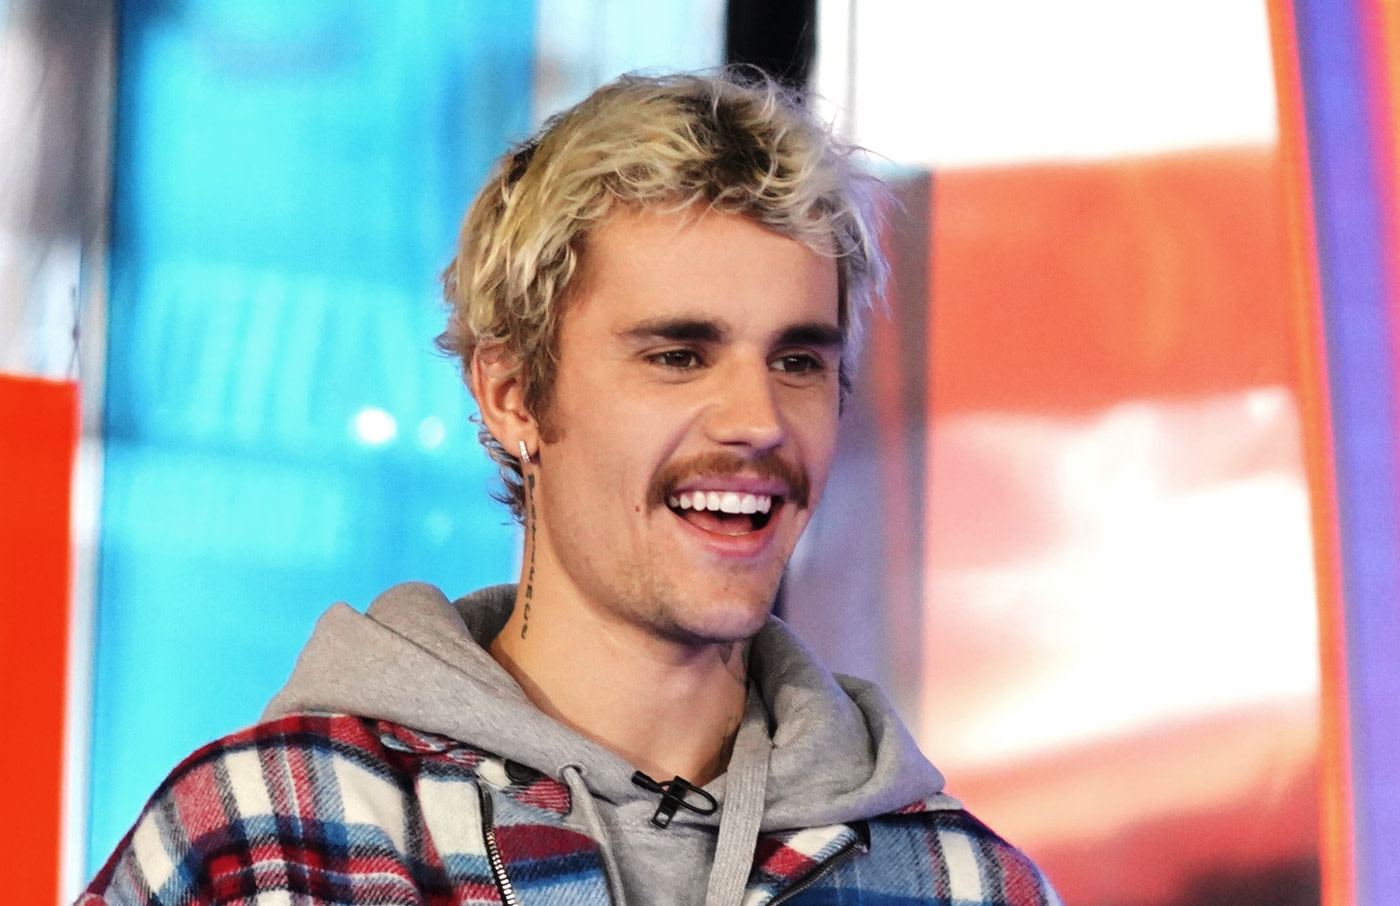  Justin  Bieber  s New Album Changes  6 Things We Want to 